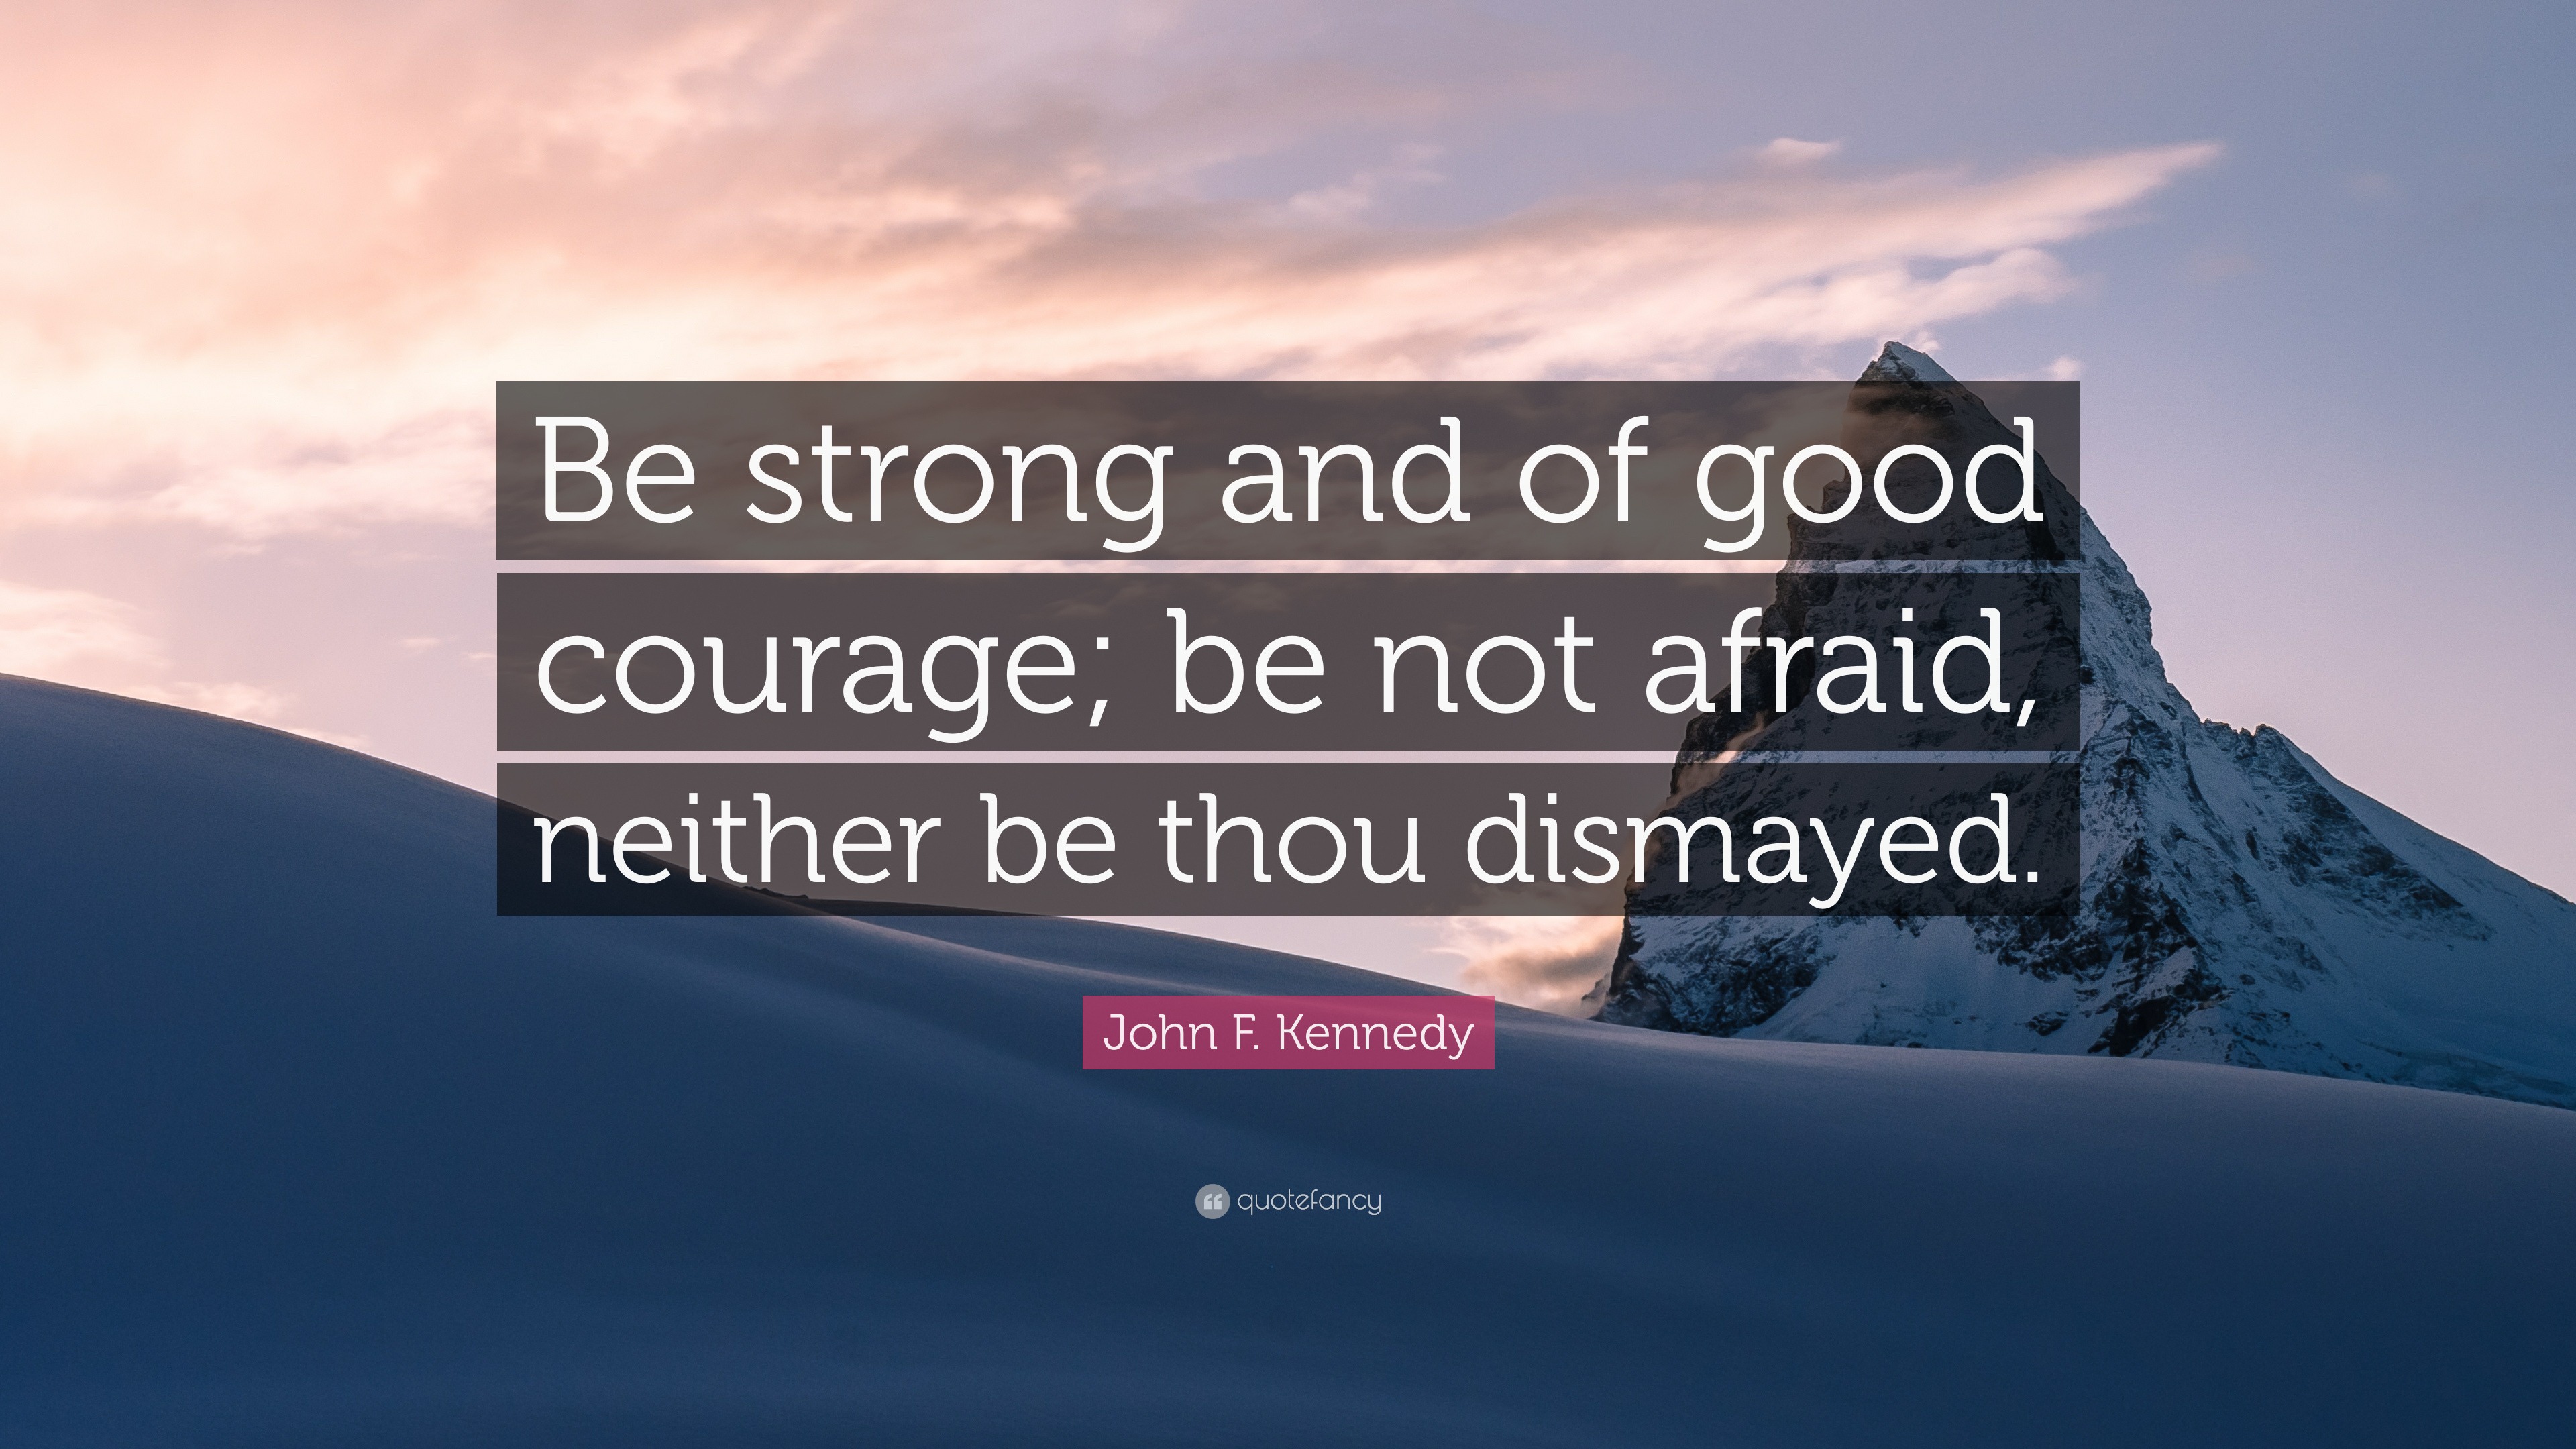 John F. Kennedy Quote: “Be strong and of good courage; be not afraid ...